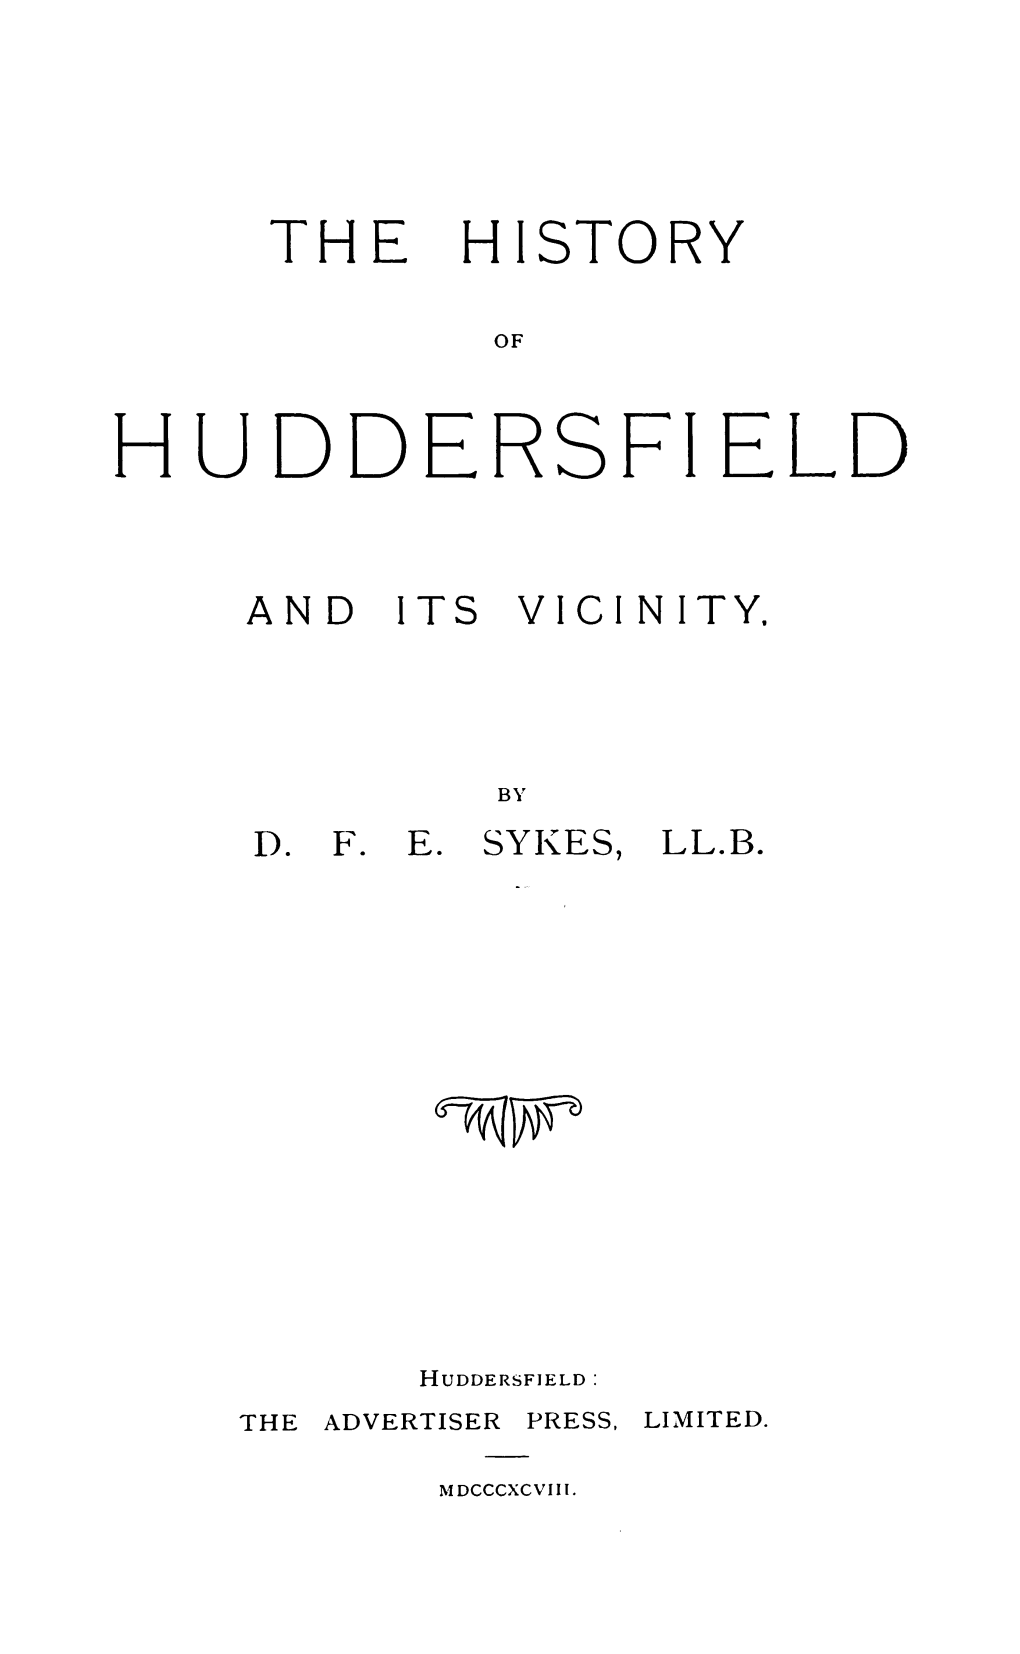 The History of Huddersfield and Its Vicinity